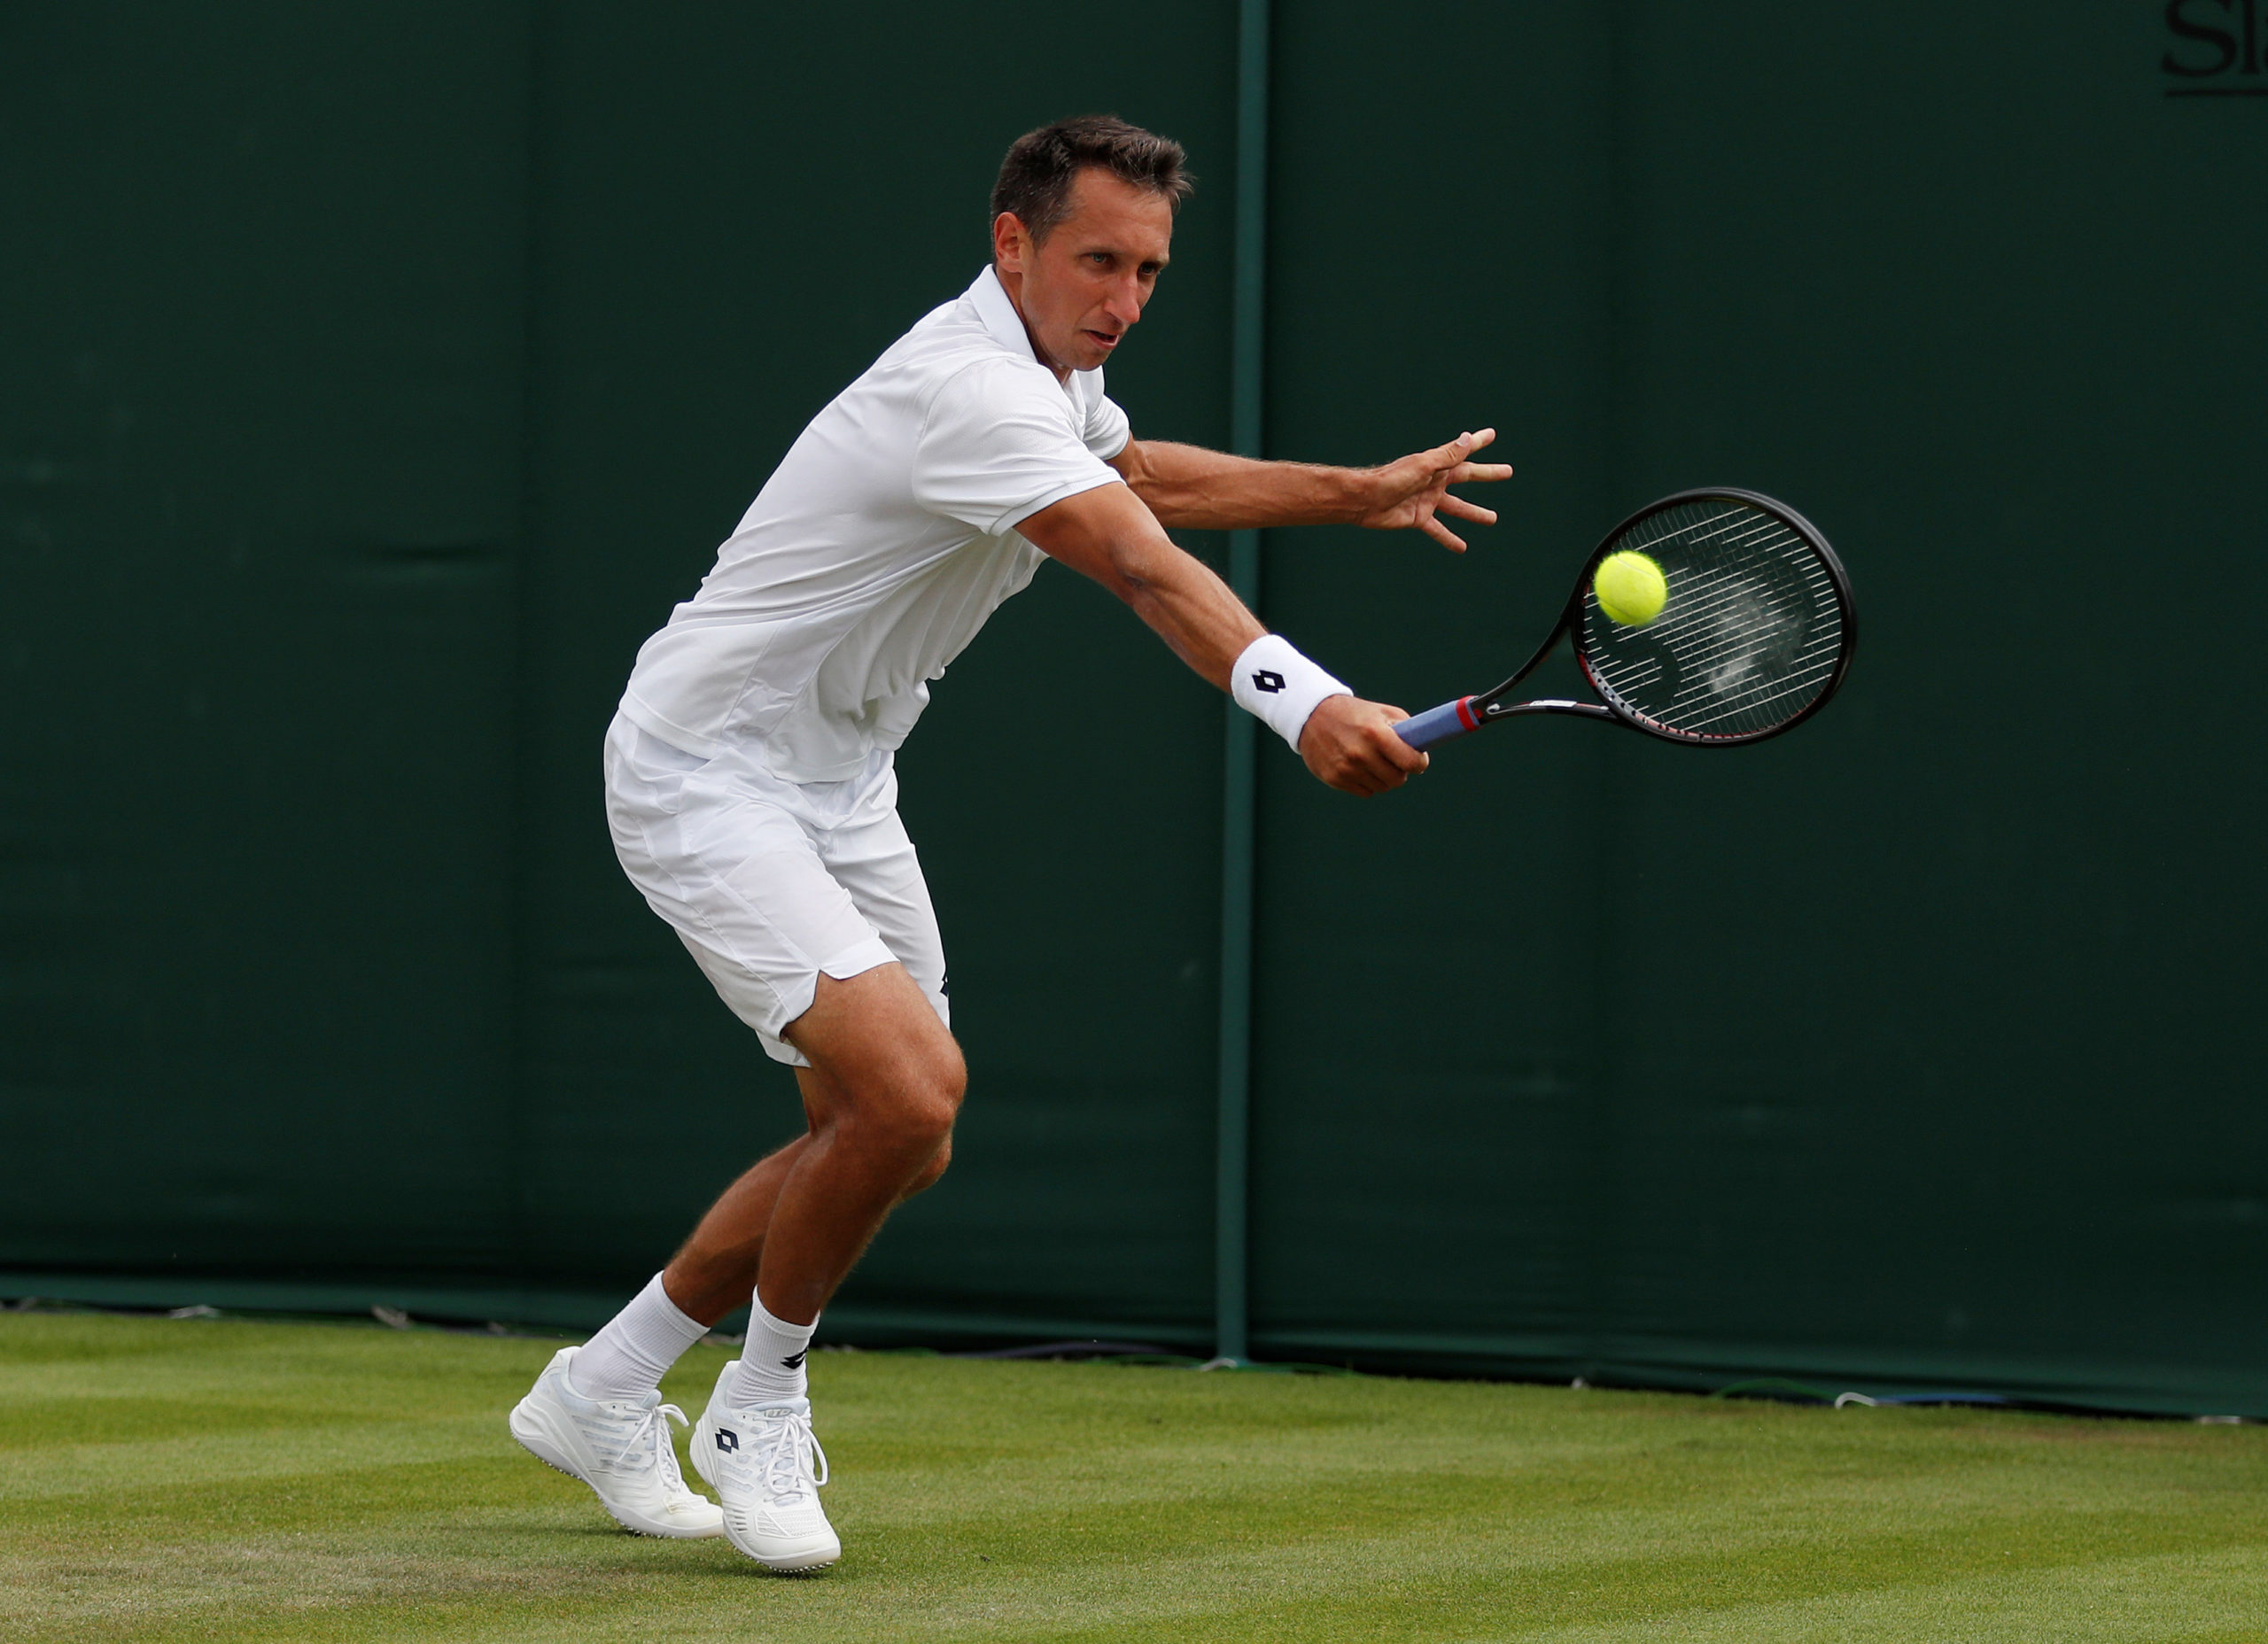 FILE PHOTO: Tennis - Wimbledon - All England Lawn Tennis and Croquet Club, London, Britain - July 4, 2018  Ukraine's Sergiy Stakhovsky in action during the second round match against Sam Querrey of the U.S.  